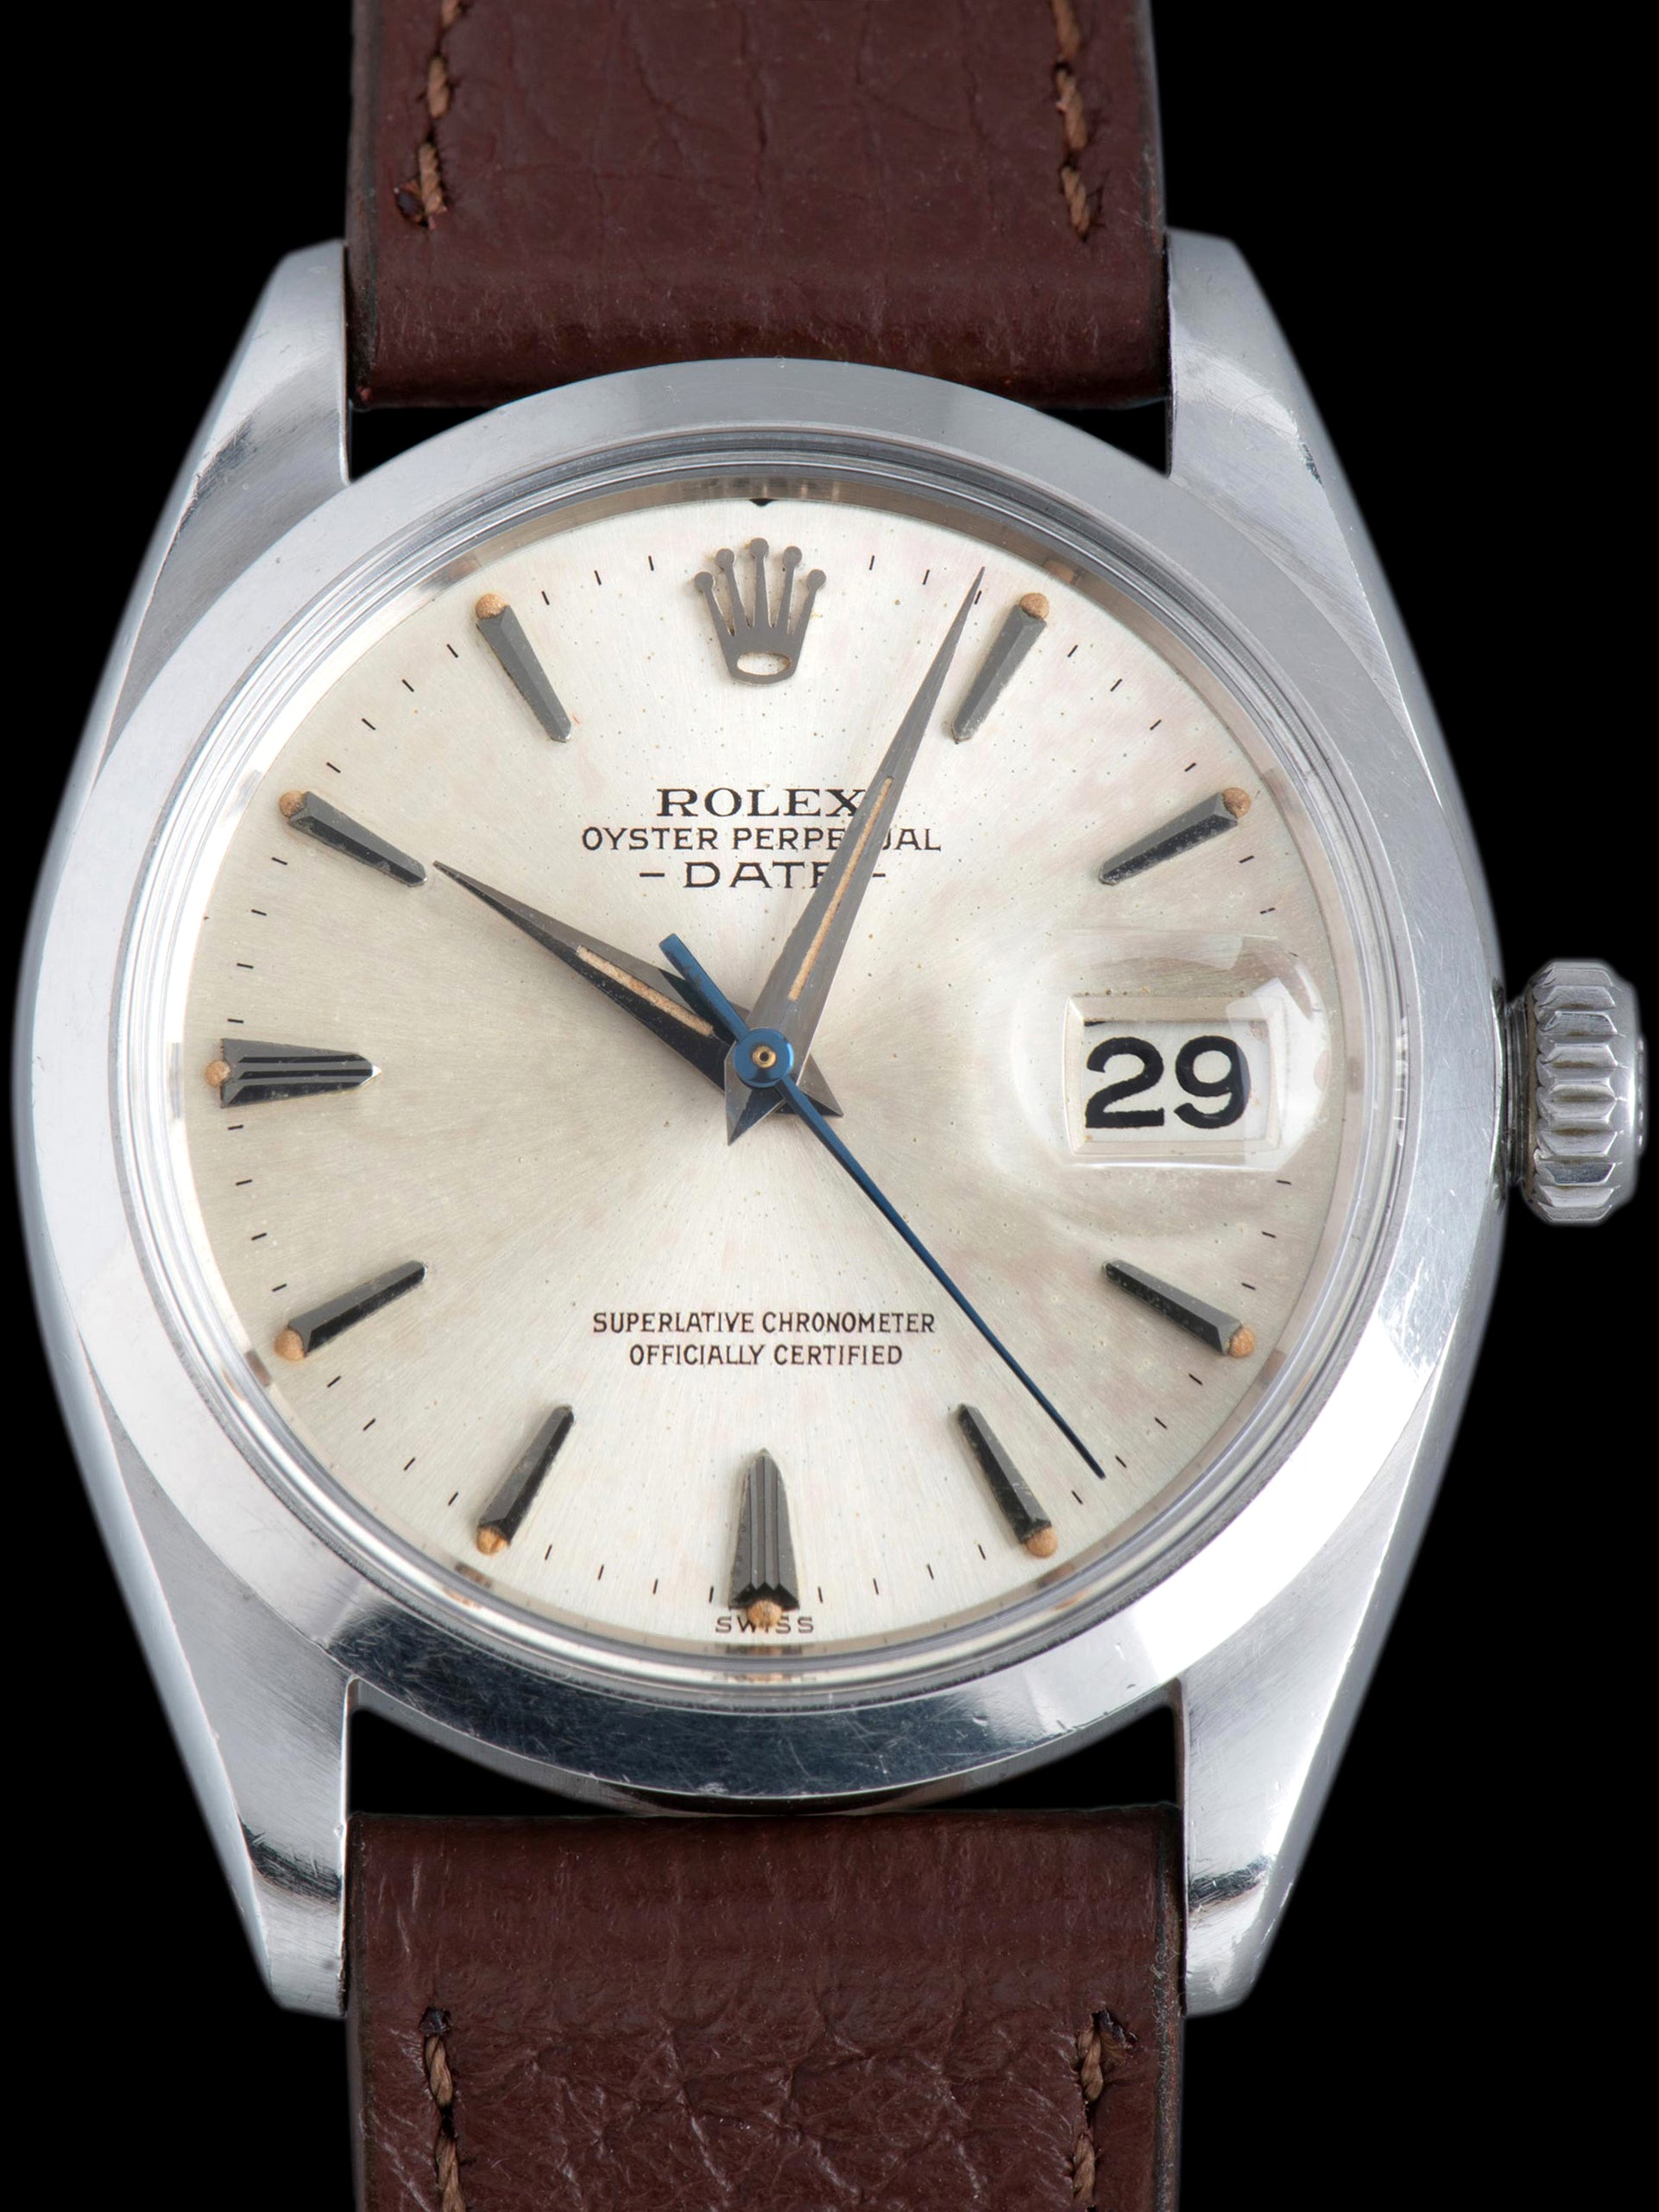 1961 Rolex Oyster Perpetual Date (Ref. 1500) "SWISS" Only Dial